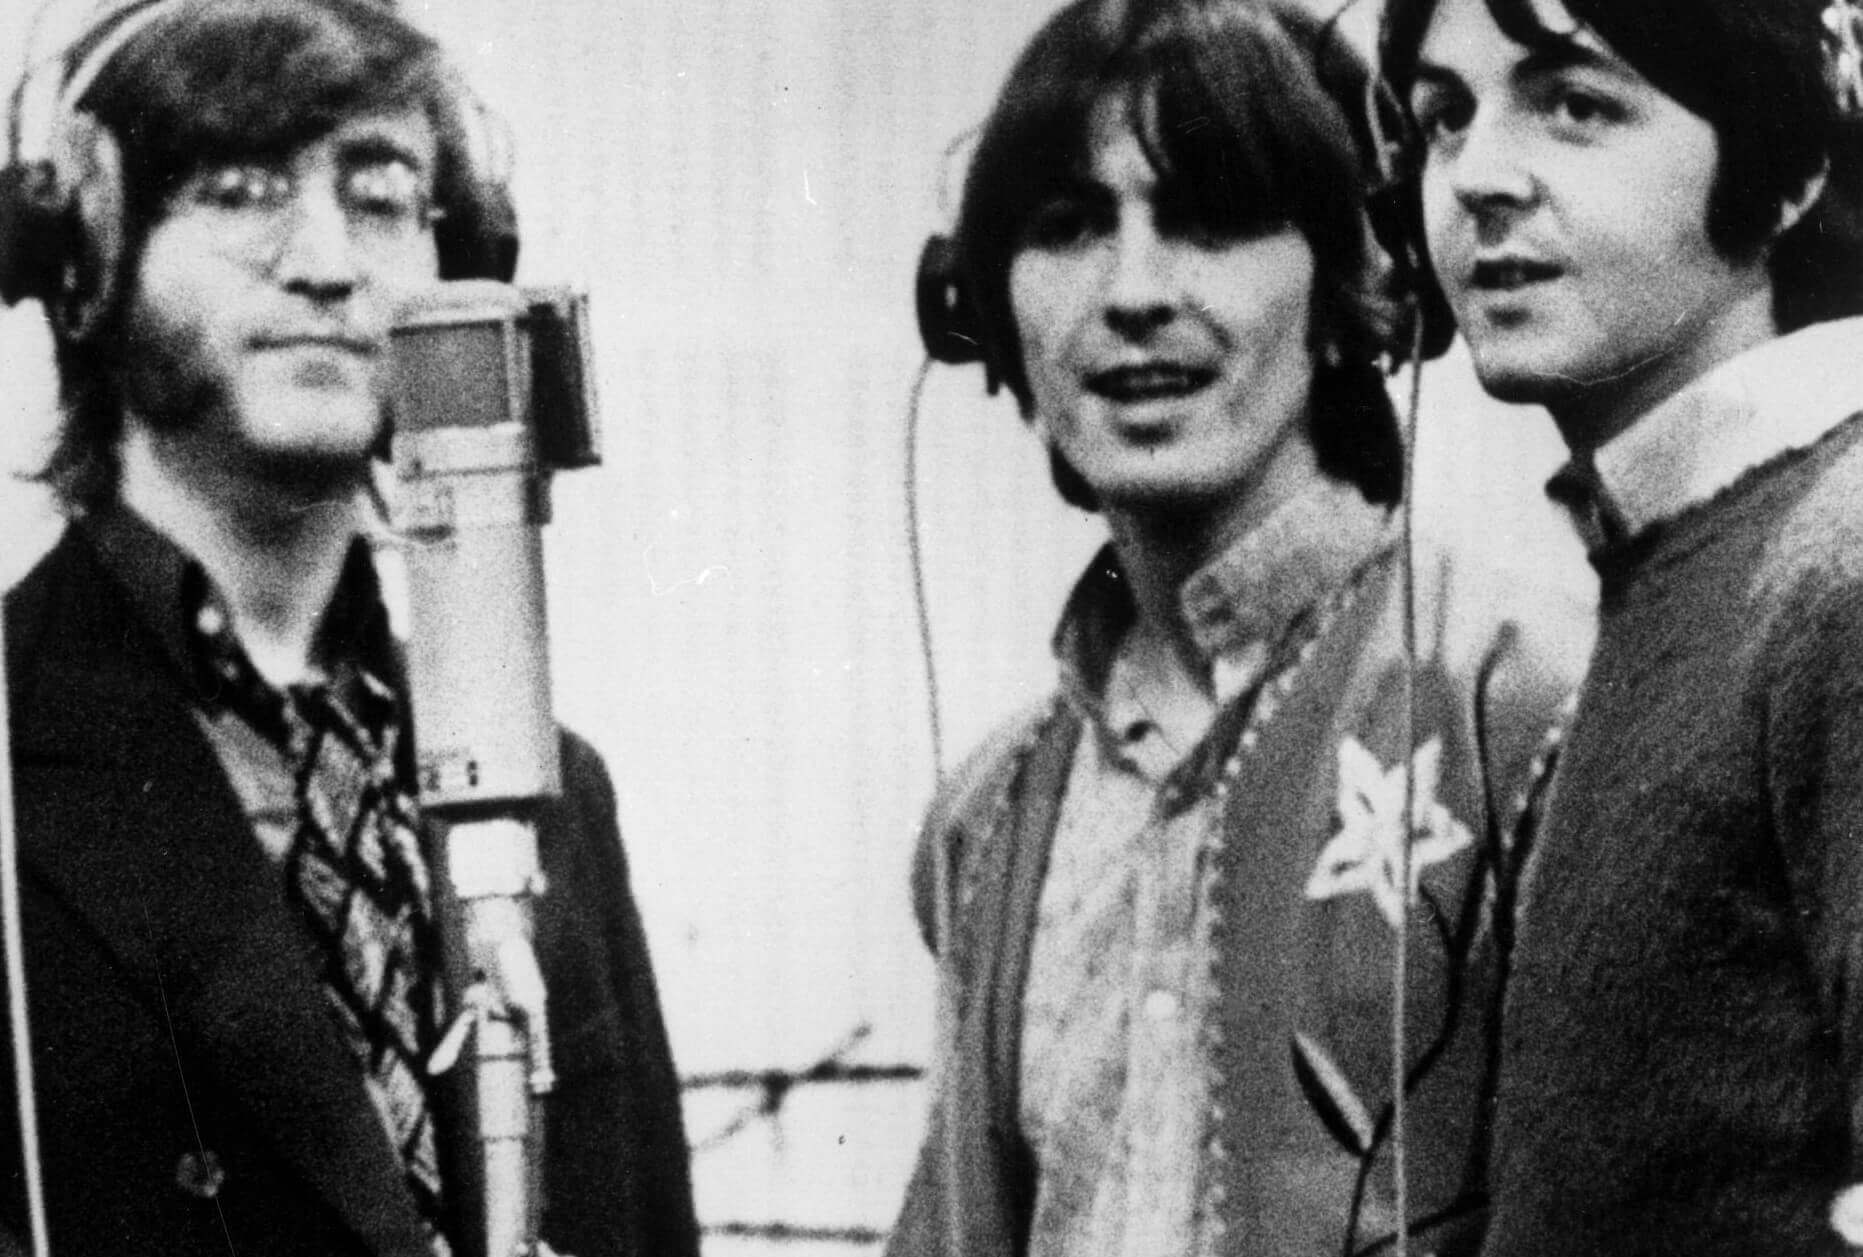 The Beatles' John Lennon, George Harrison, and Paul McCartney during the "Tomorrow Never Knows" era